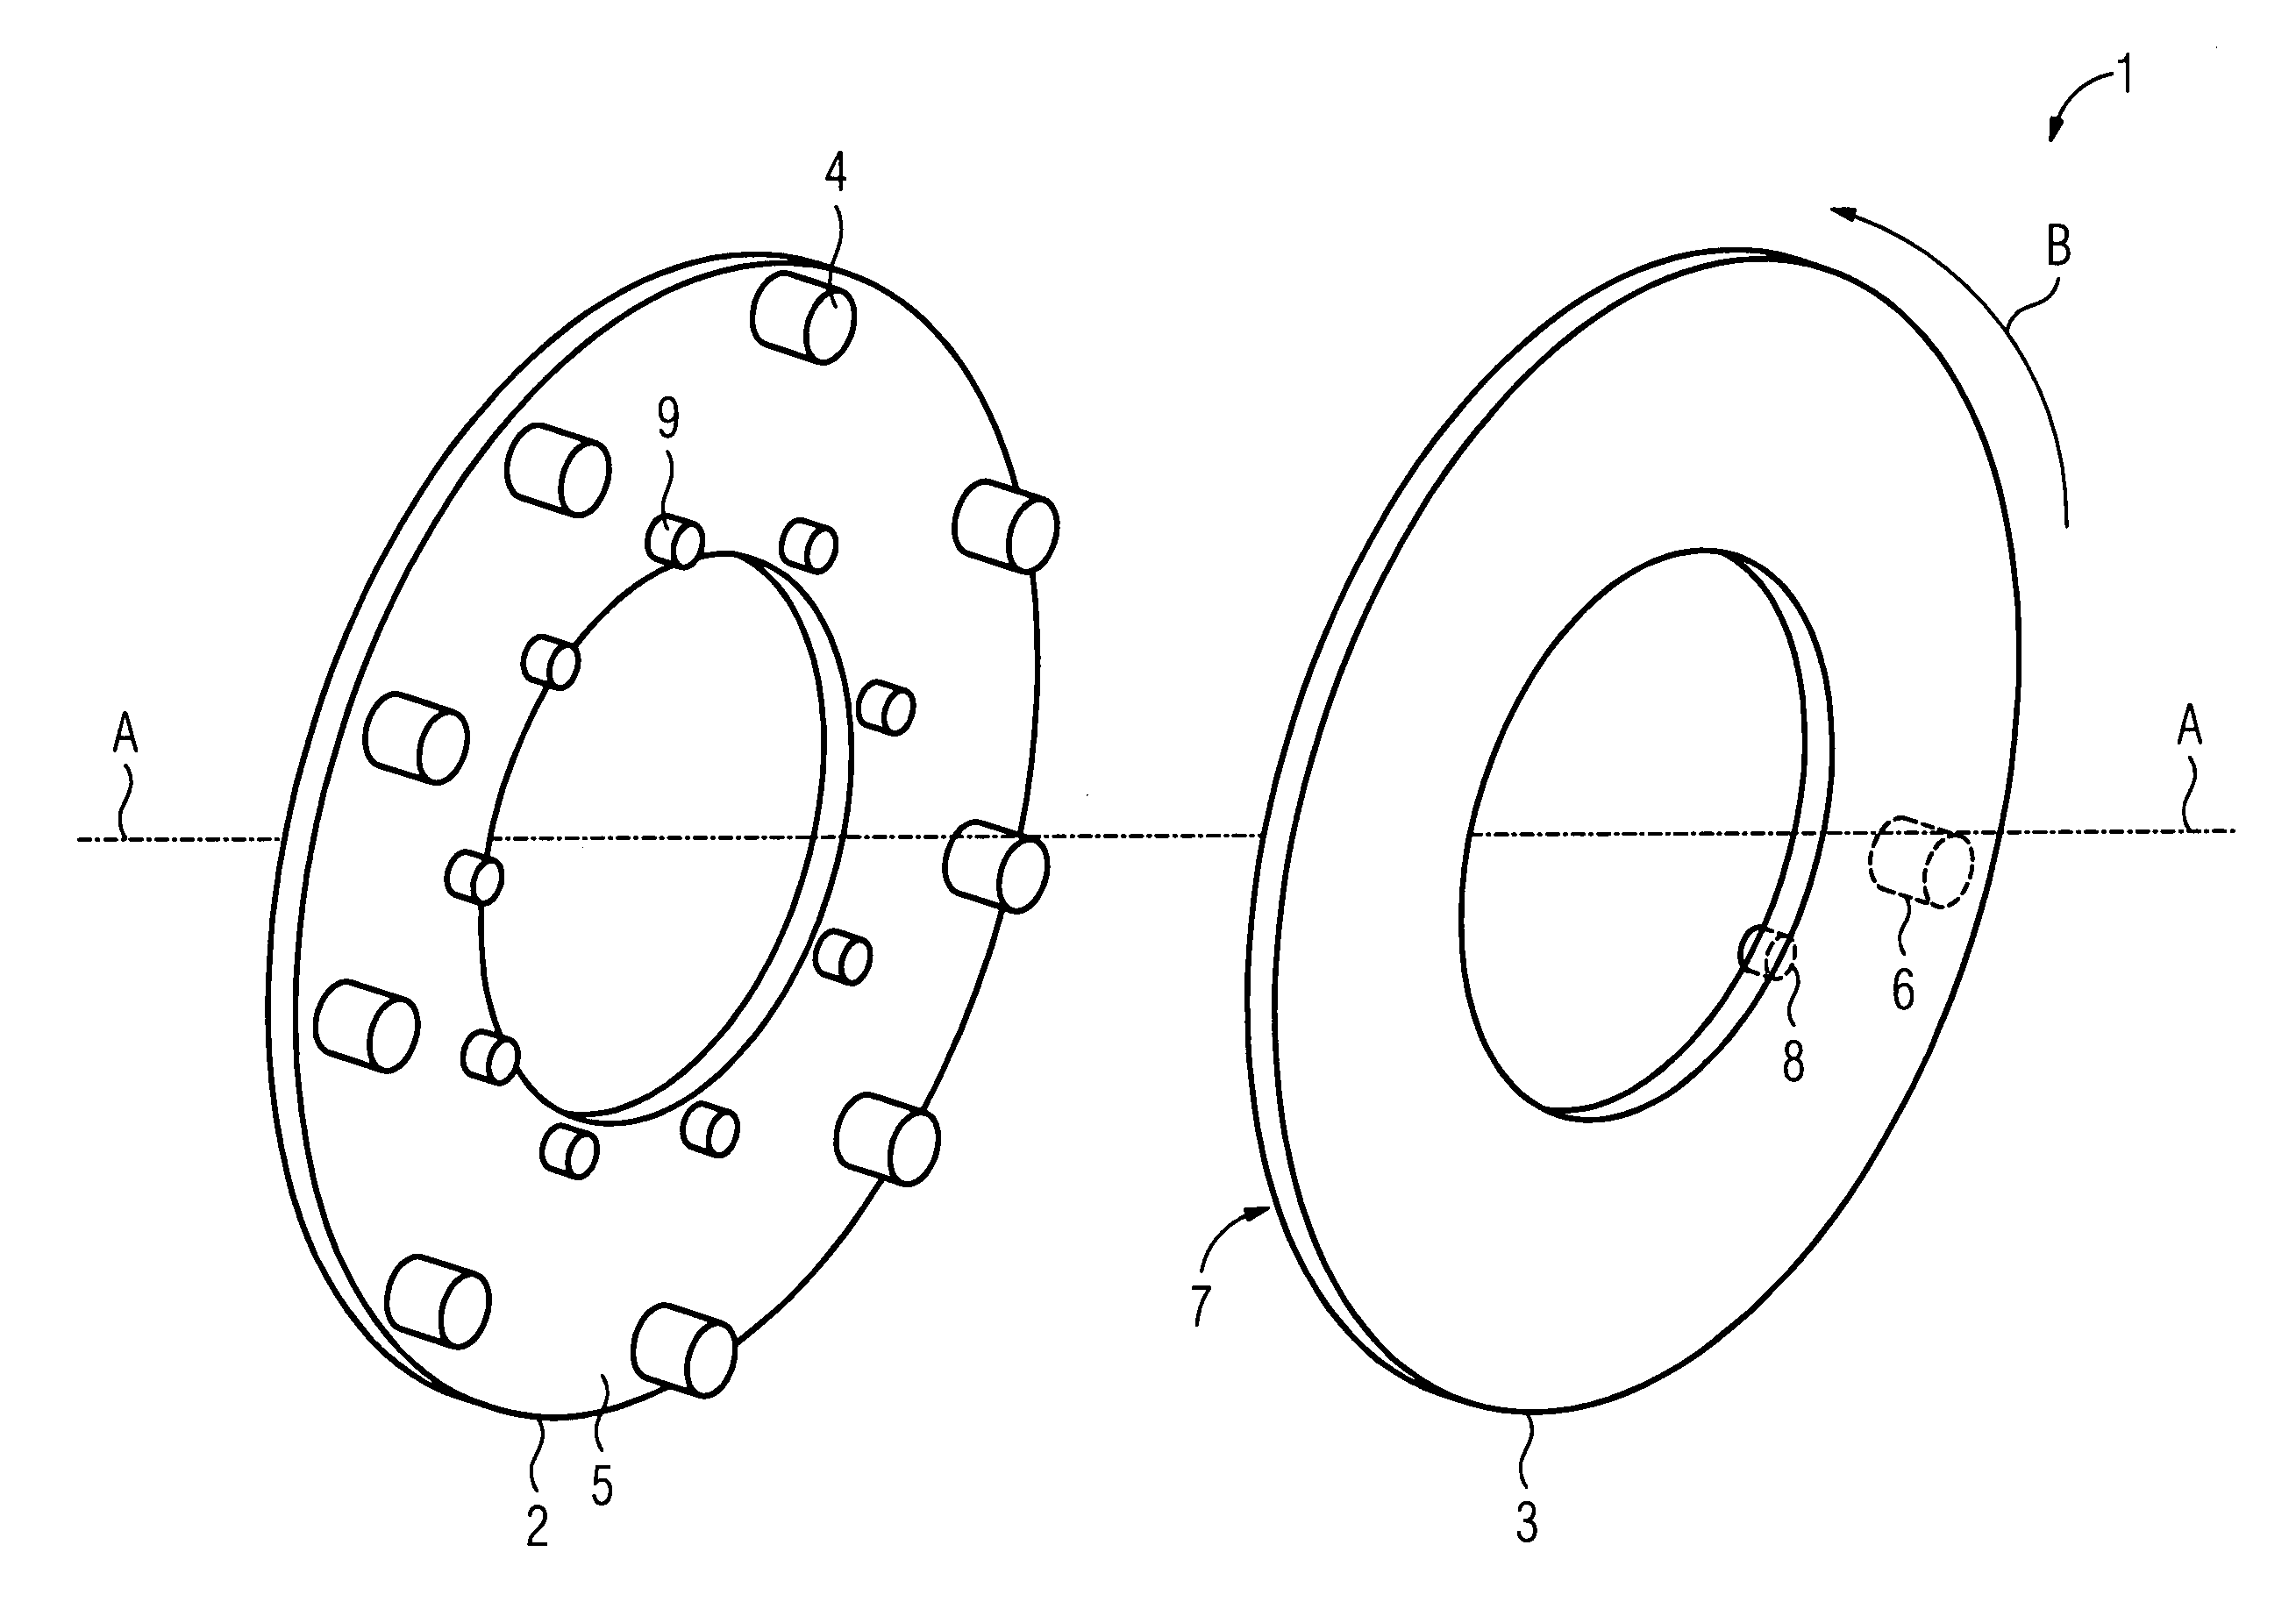 Device for transferring light signals between two elements relatively movable to one another